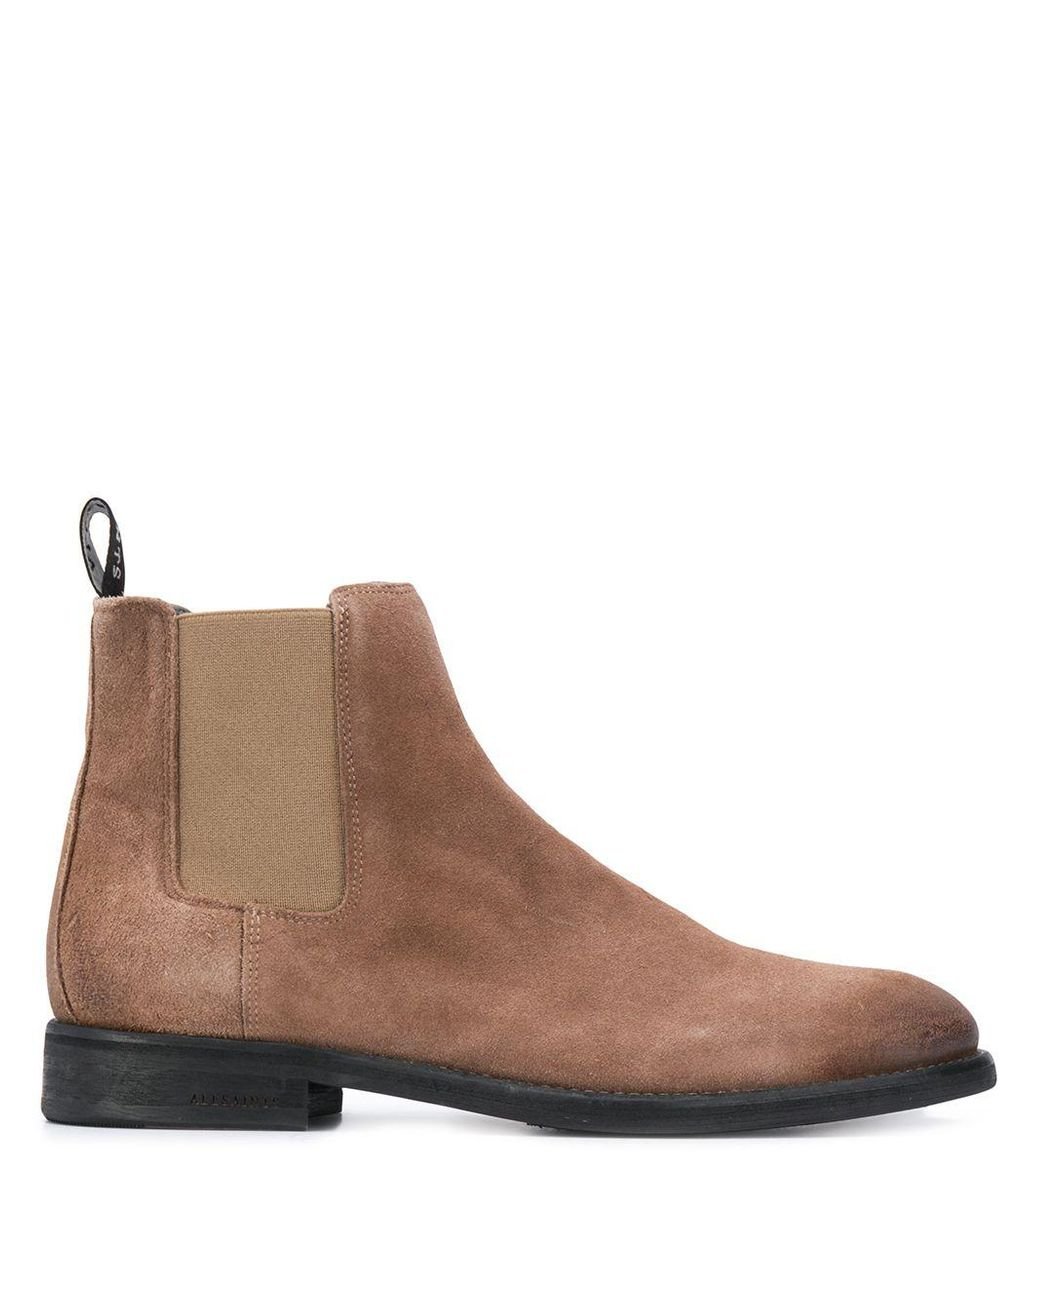 AllSaints Harley Suede Chelsea Boots in Brown for Men - Lyst